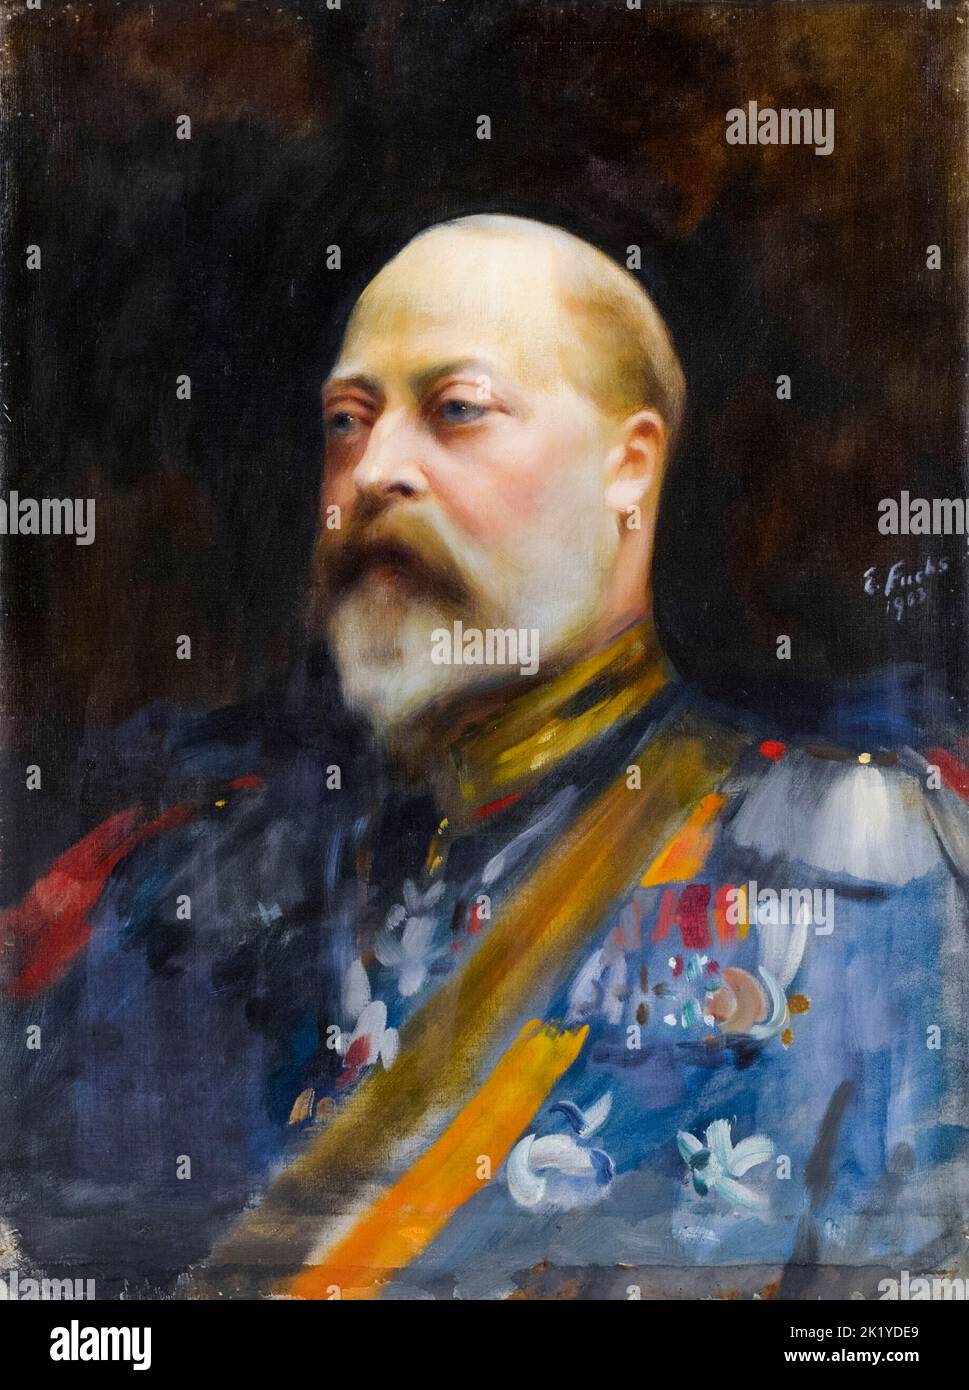 Edward VII (1841-1910), King of the United Kingdom of Great Britain and Ireland (1901-1910), portrait painting in oil on canvas by Emil Fuchs, 1903 Stock Photo